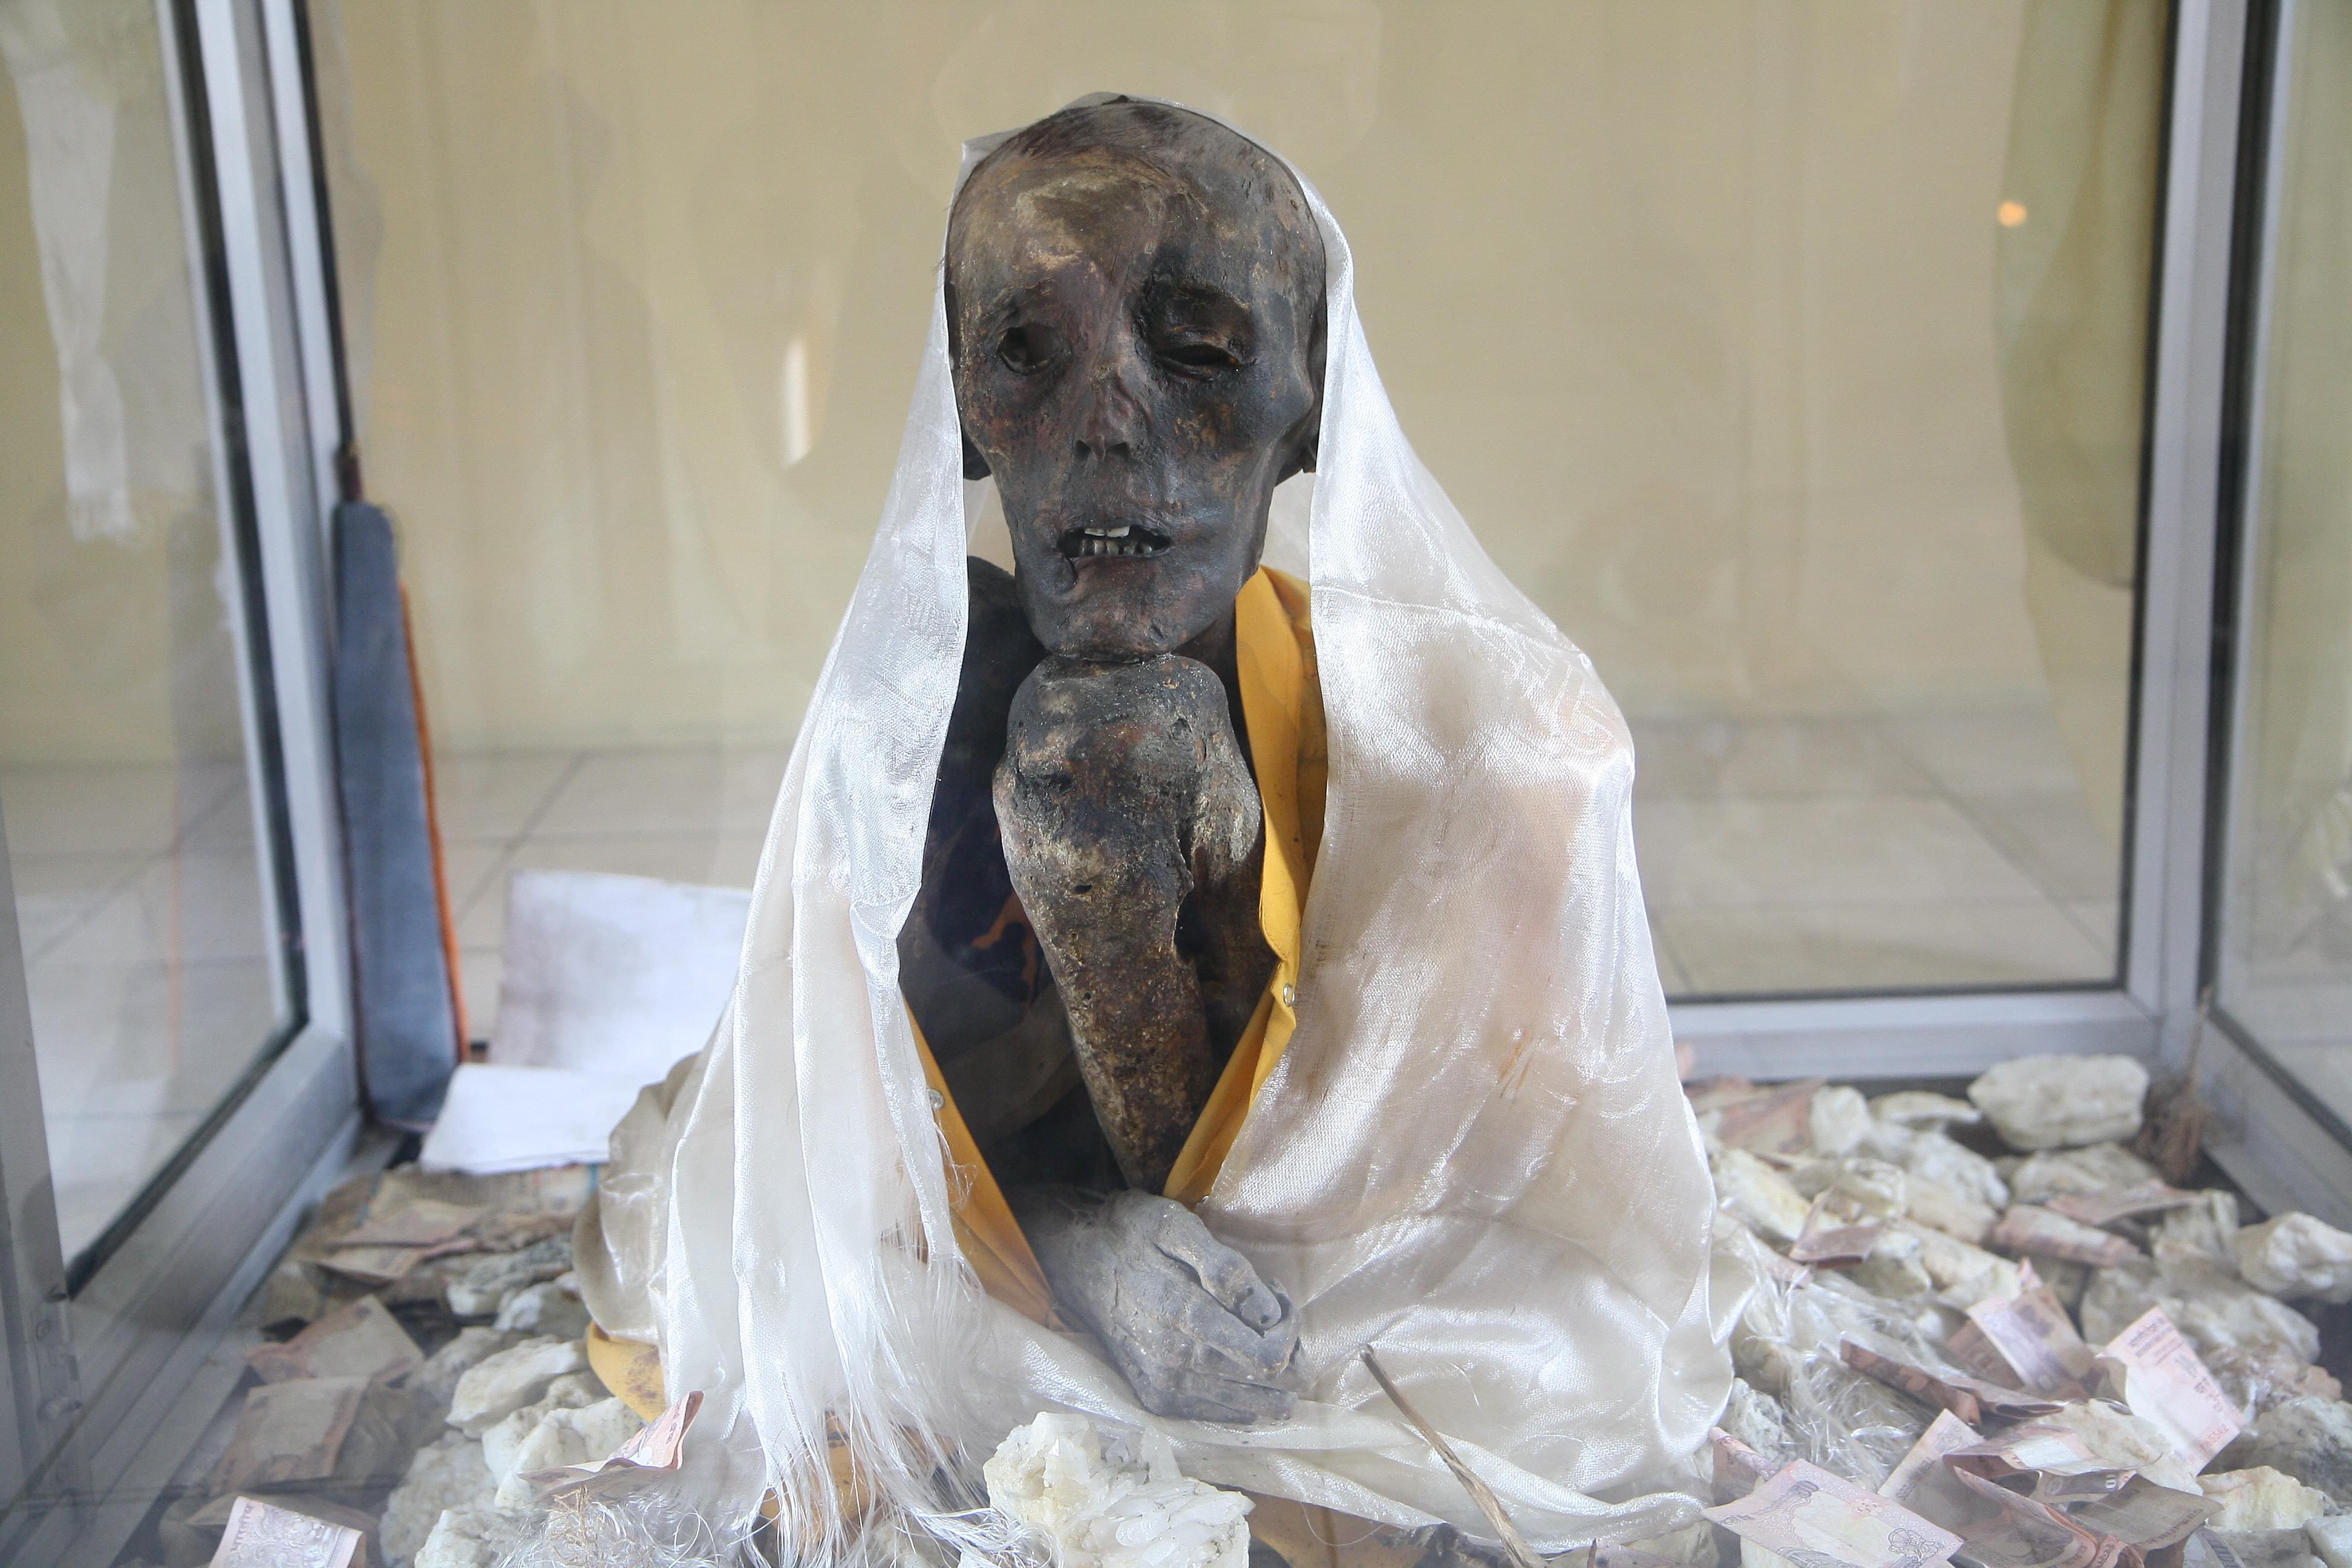 Witness the Ancient Mummy of Giu Village